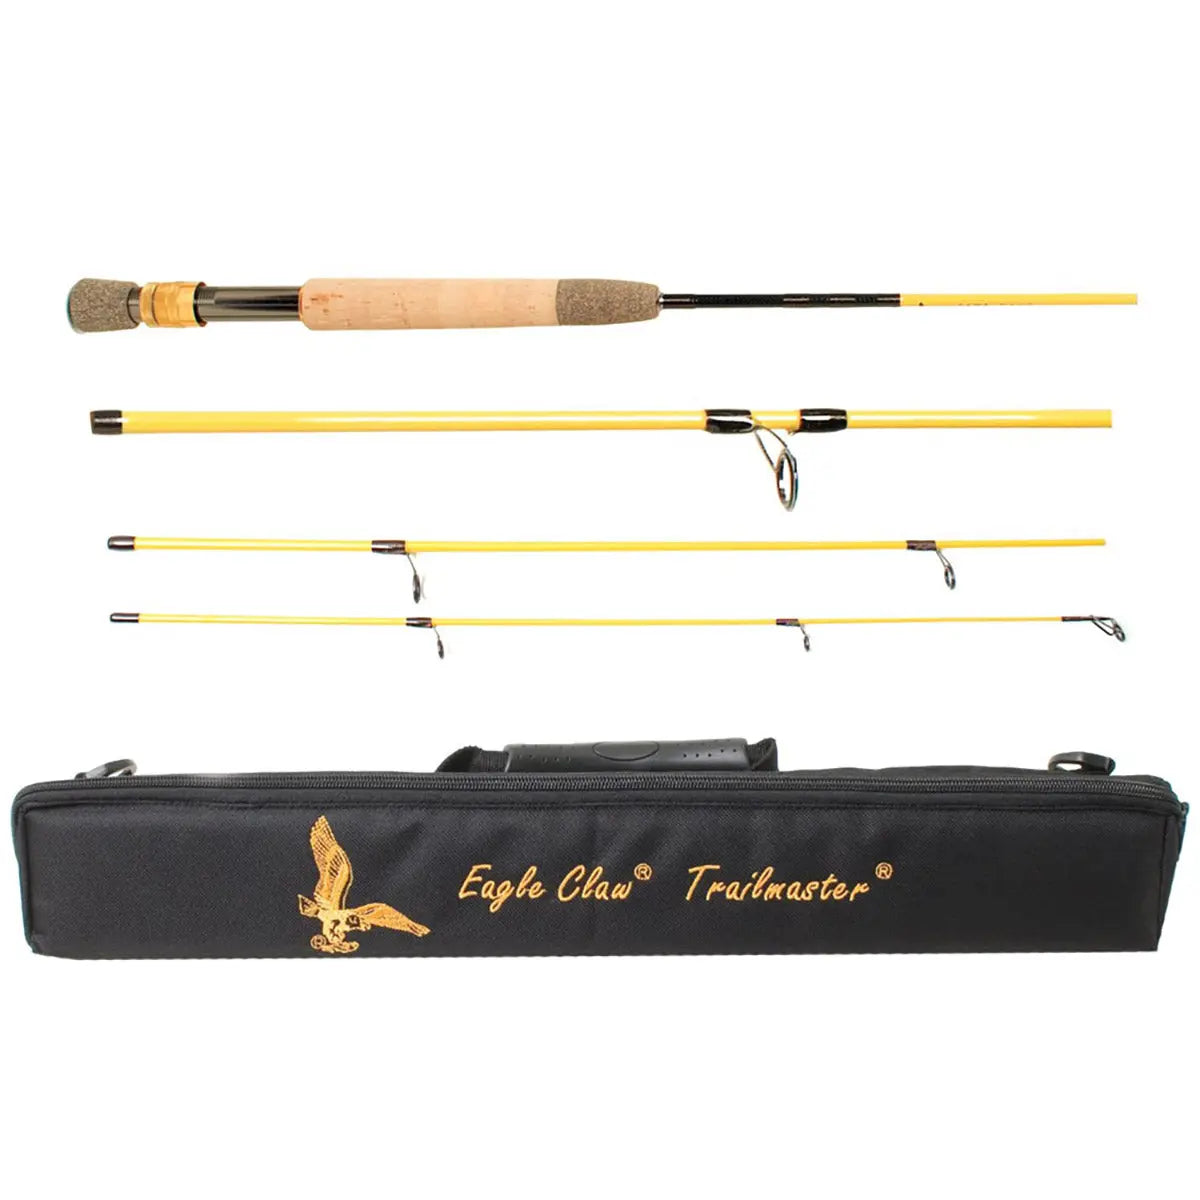 Eagle Claw 7' Trailmaster Travel Spin/Fly Fishing Rod Eagle Claw